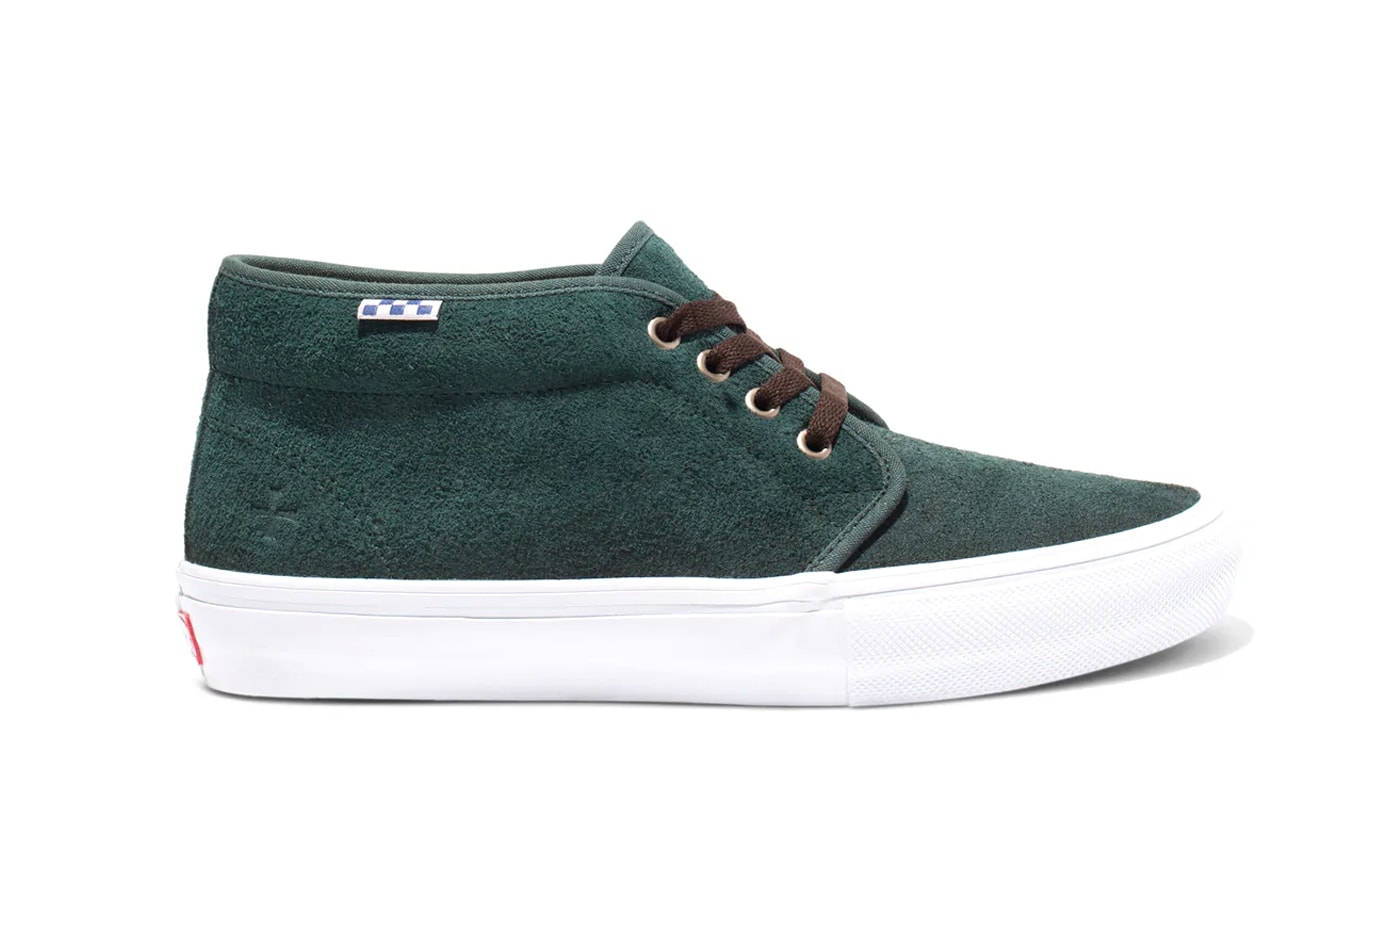 Noah Vans skate chukka collaboration red tan green white checkerboard release info date price